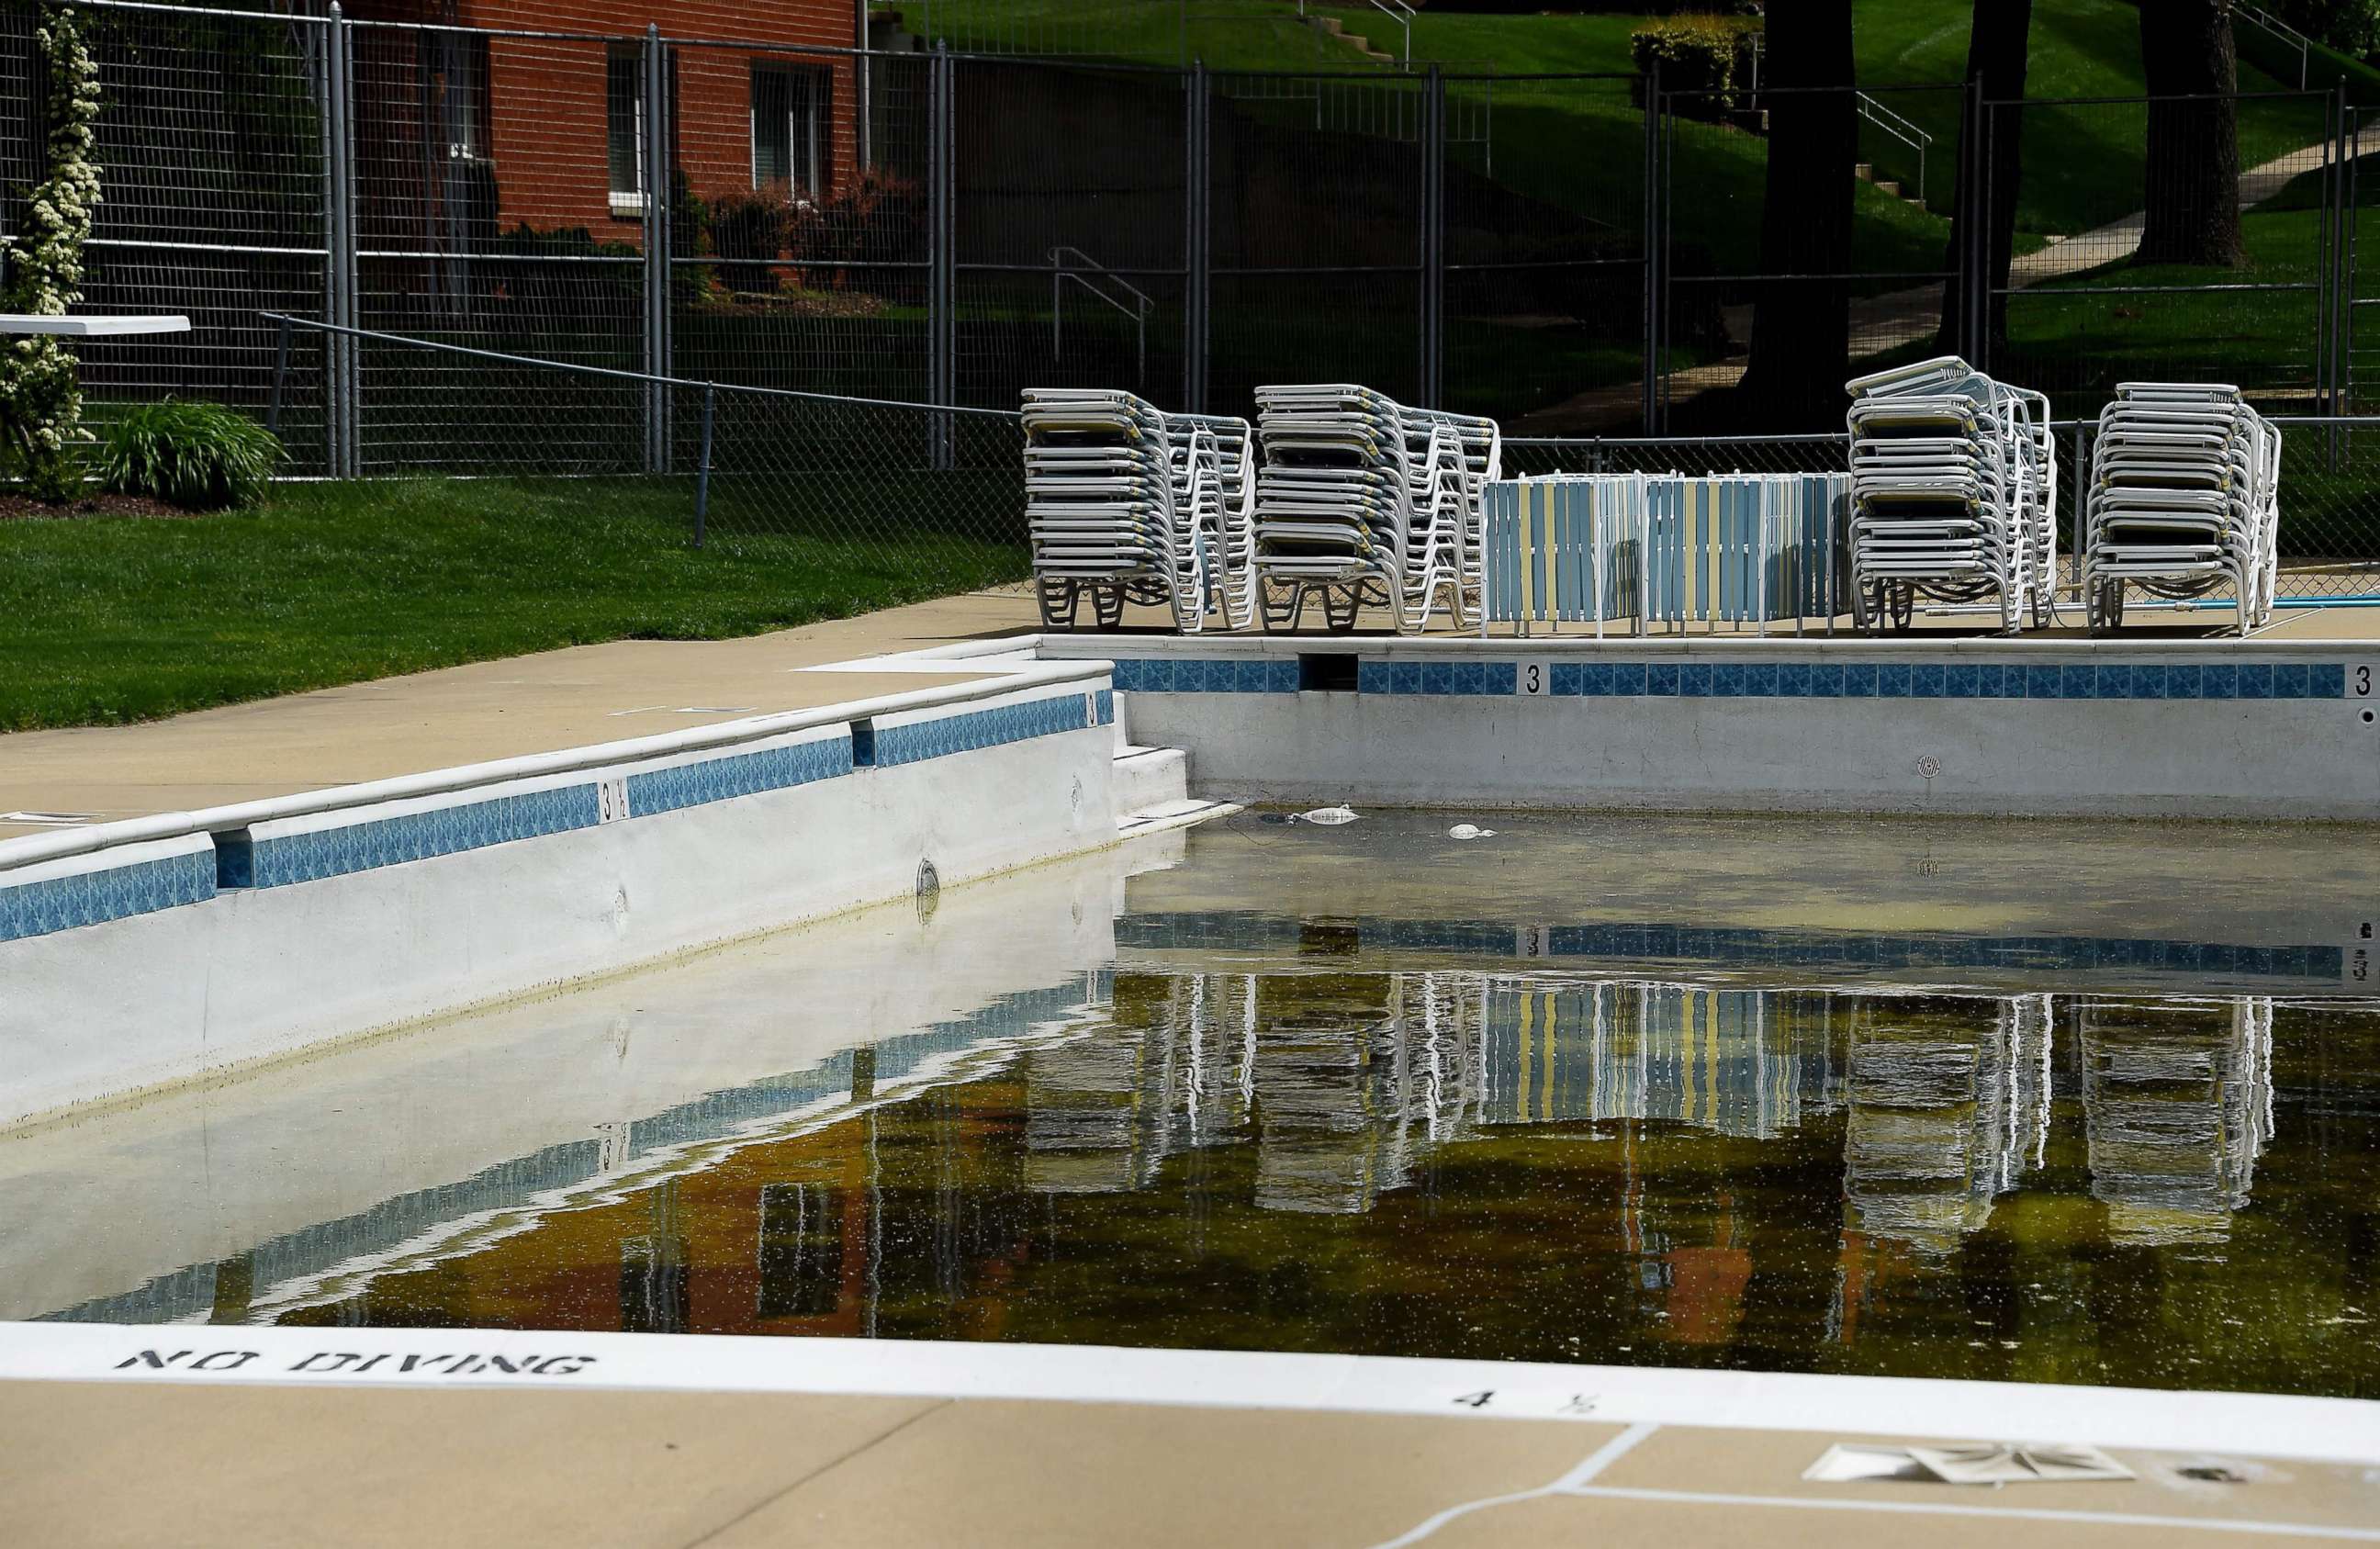 PHOTO: An empty pool is viewed at an apartment complex awaiting reopening as Memorial Day approaches amid the coronavirus pandemic, May 14, 2020, in Arlington, Virginia.